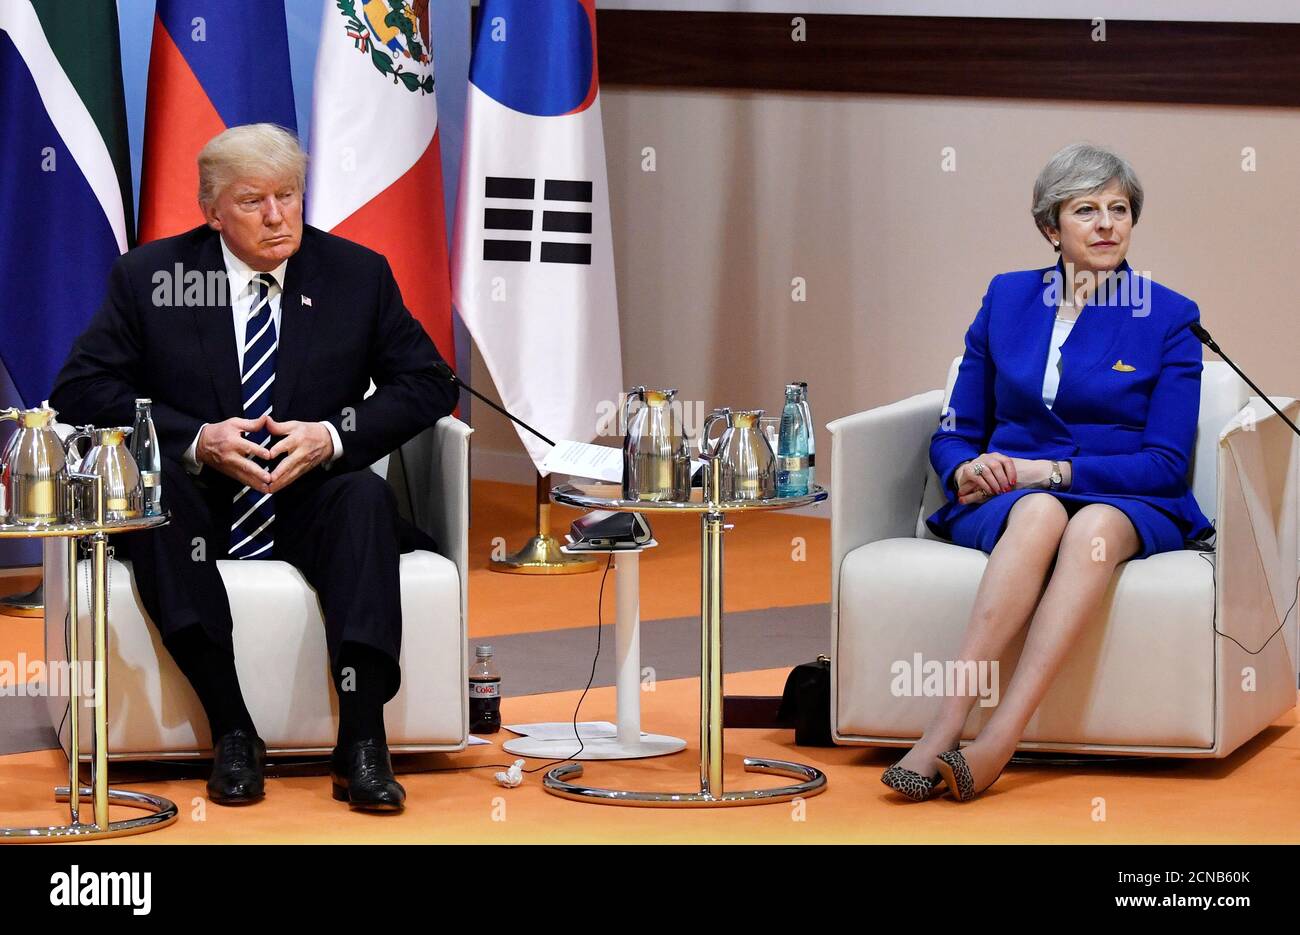 US President Donald Trump and Britain's Prime Minister Theresa May meet at the start of the 'retreat meeting' on the first day of the G20 summit in Hamburg, Germany, July 7, 2017. REUTERS/John MACDOUGALL,POOL Stock Photo